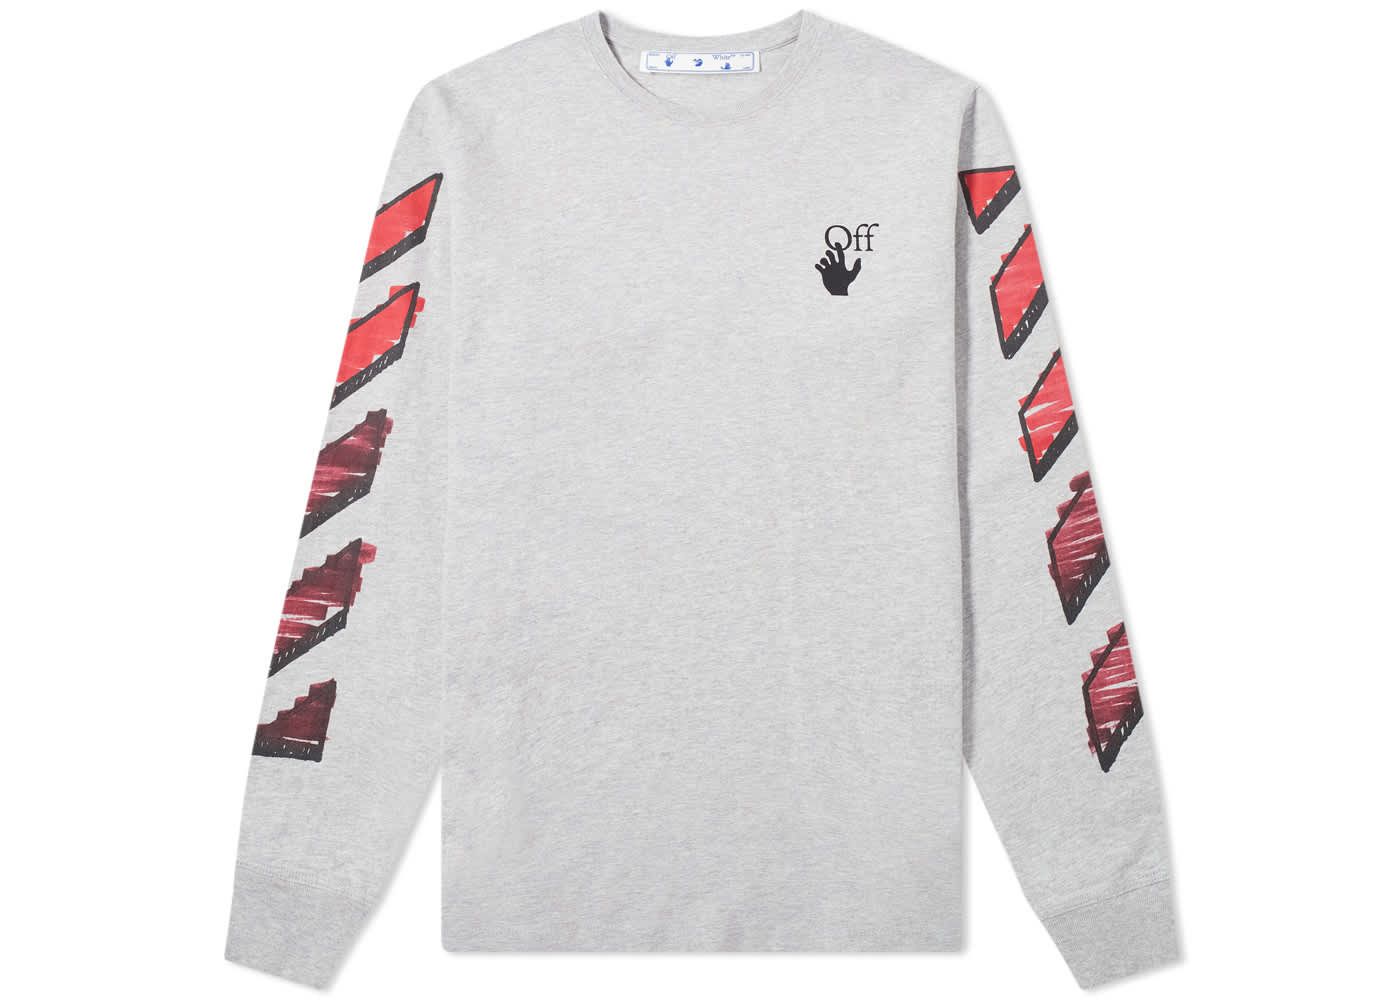 OFF-WHITE Marker Arrows Long Sleeve T-Shirt Grey Red Men's